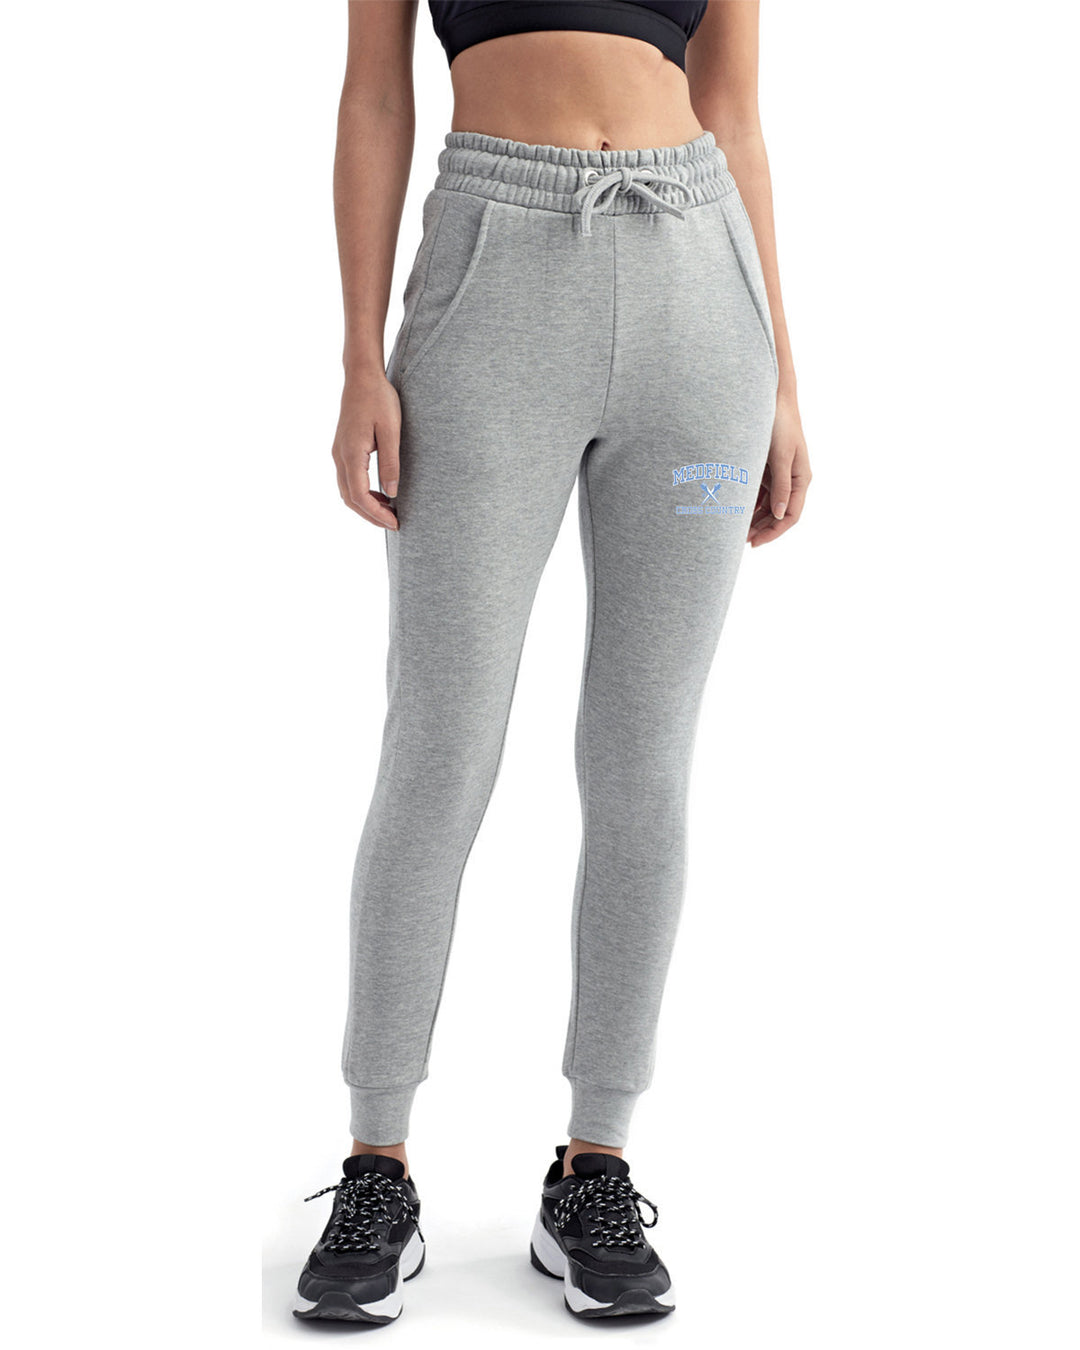 Medfield Cross Country Womens Fitted Maria Jogger (TD055)